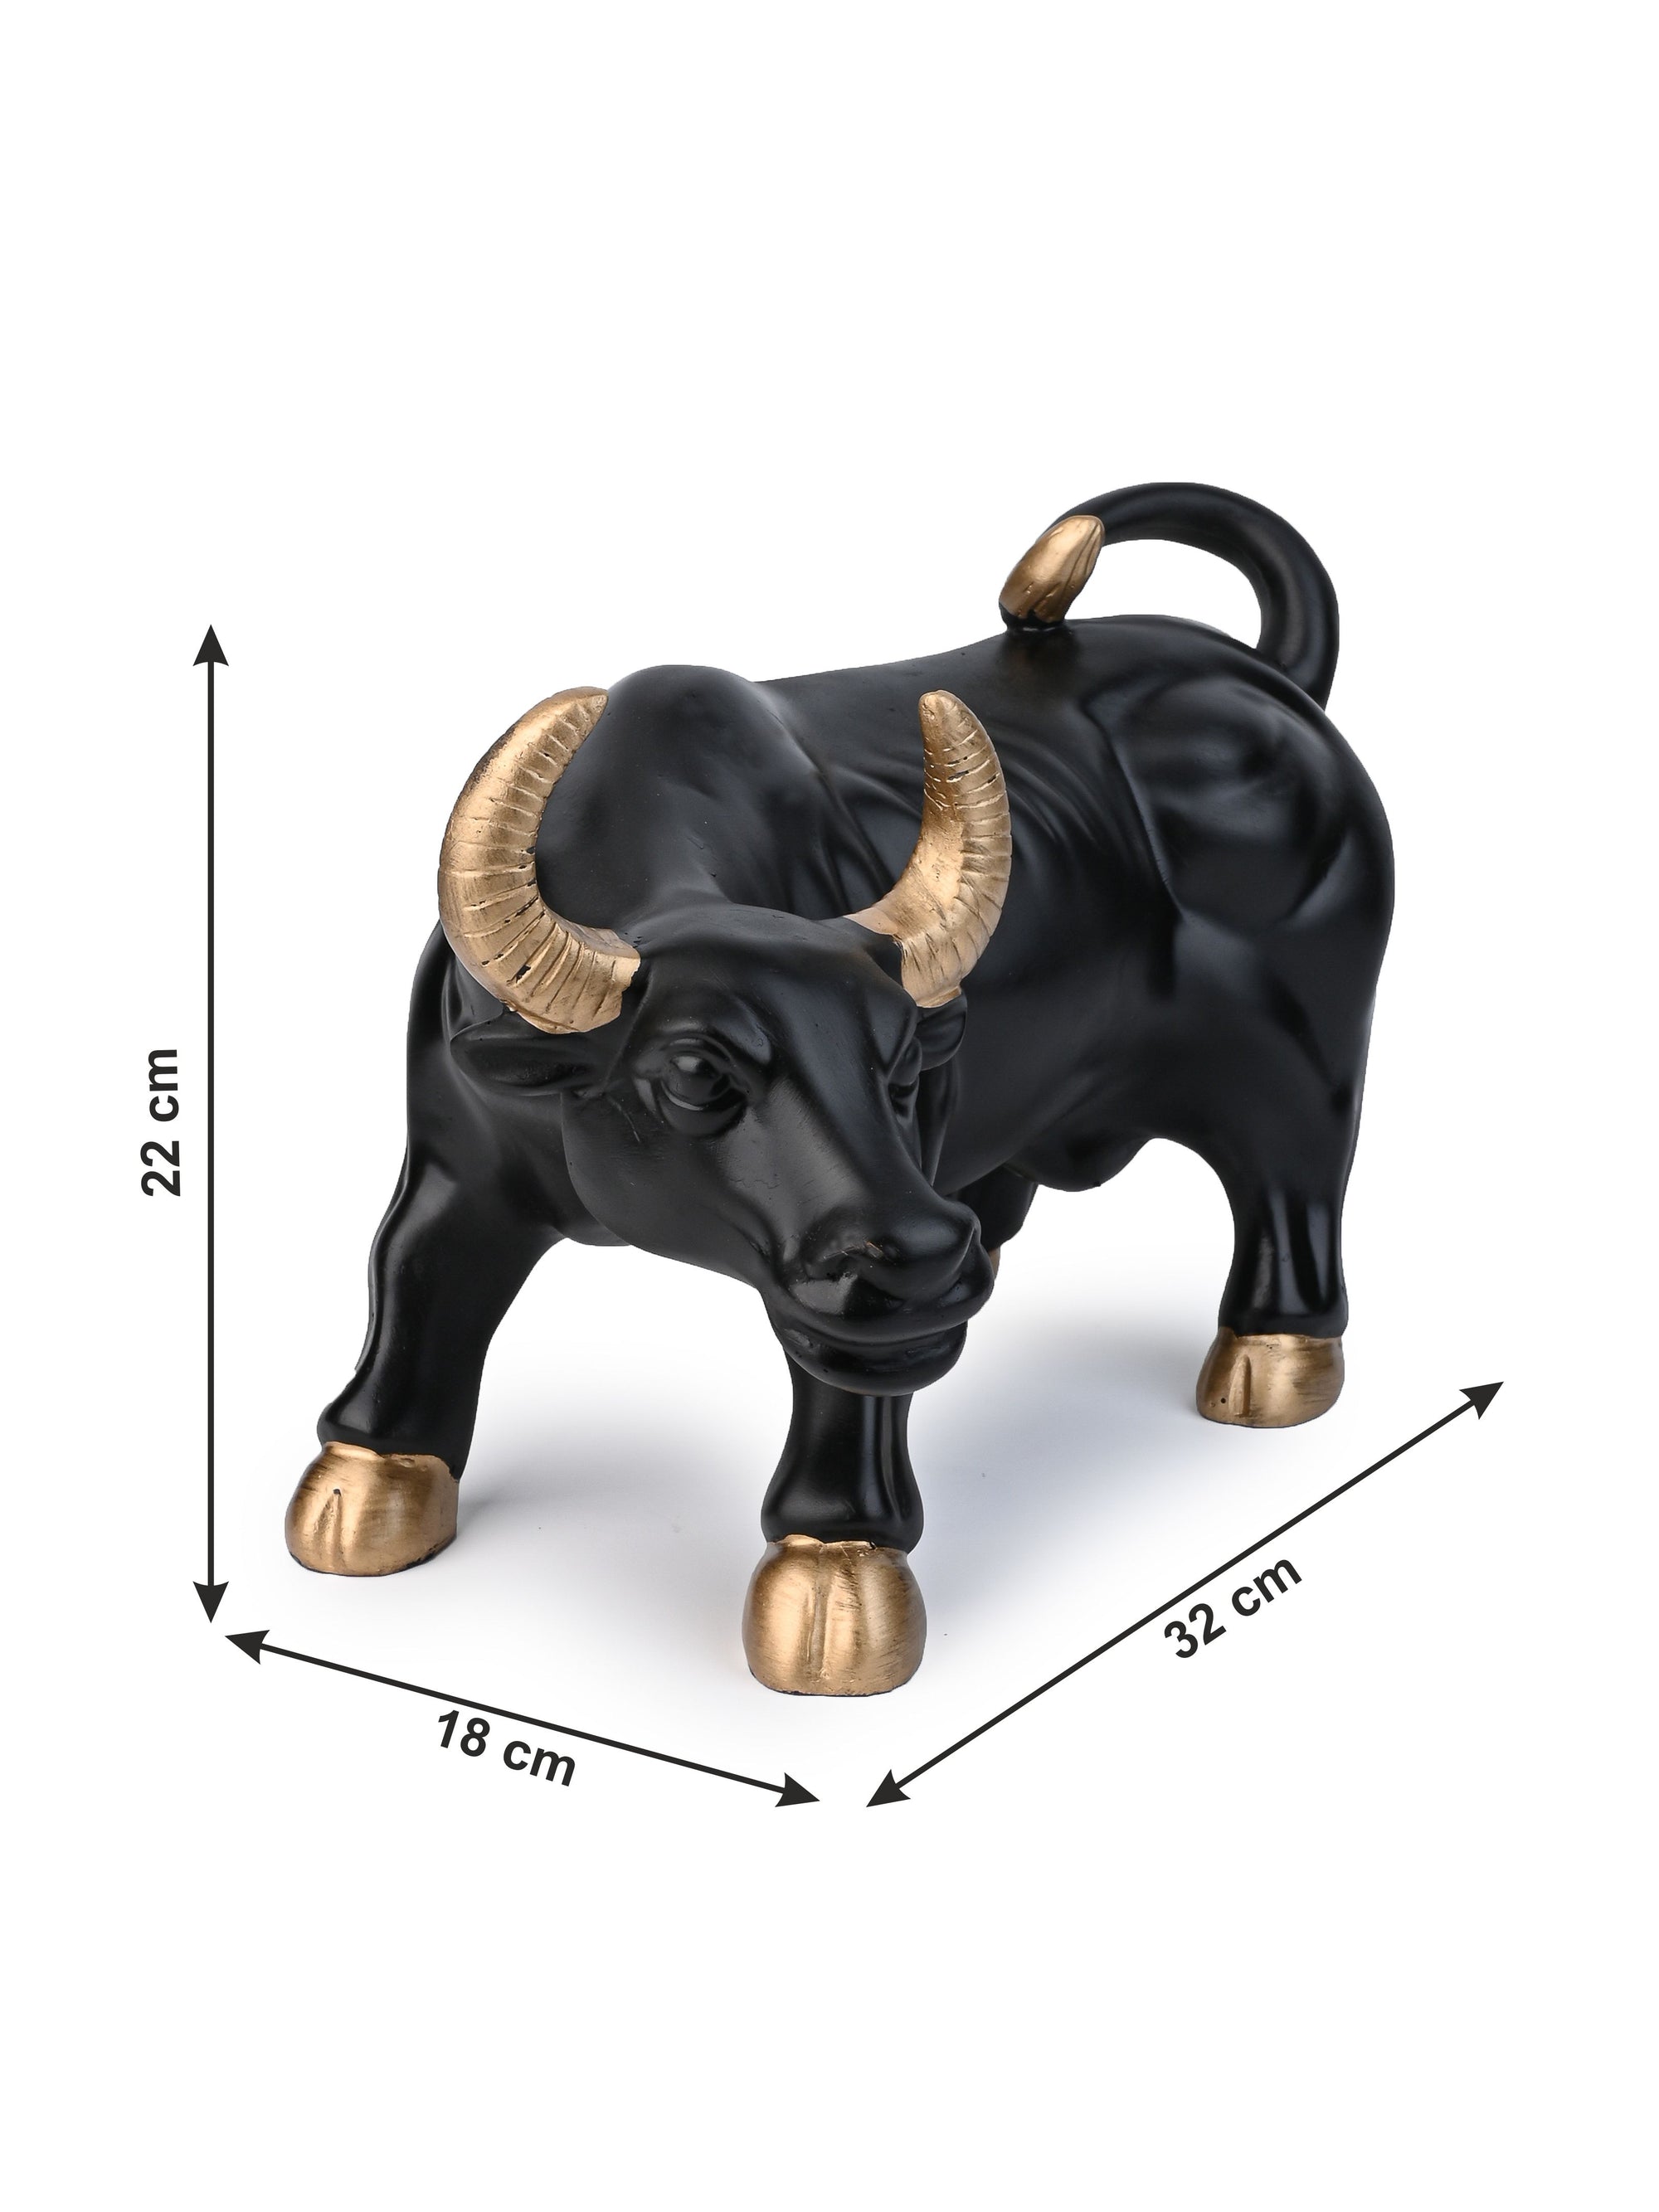 Resin Crafted Charging Black Bull Home Decor Showpiece - 12 inches